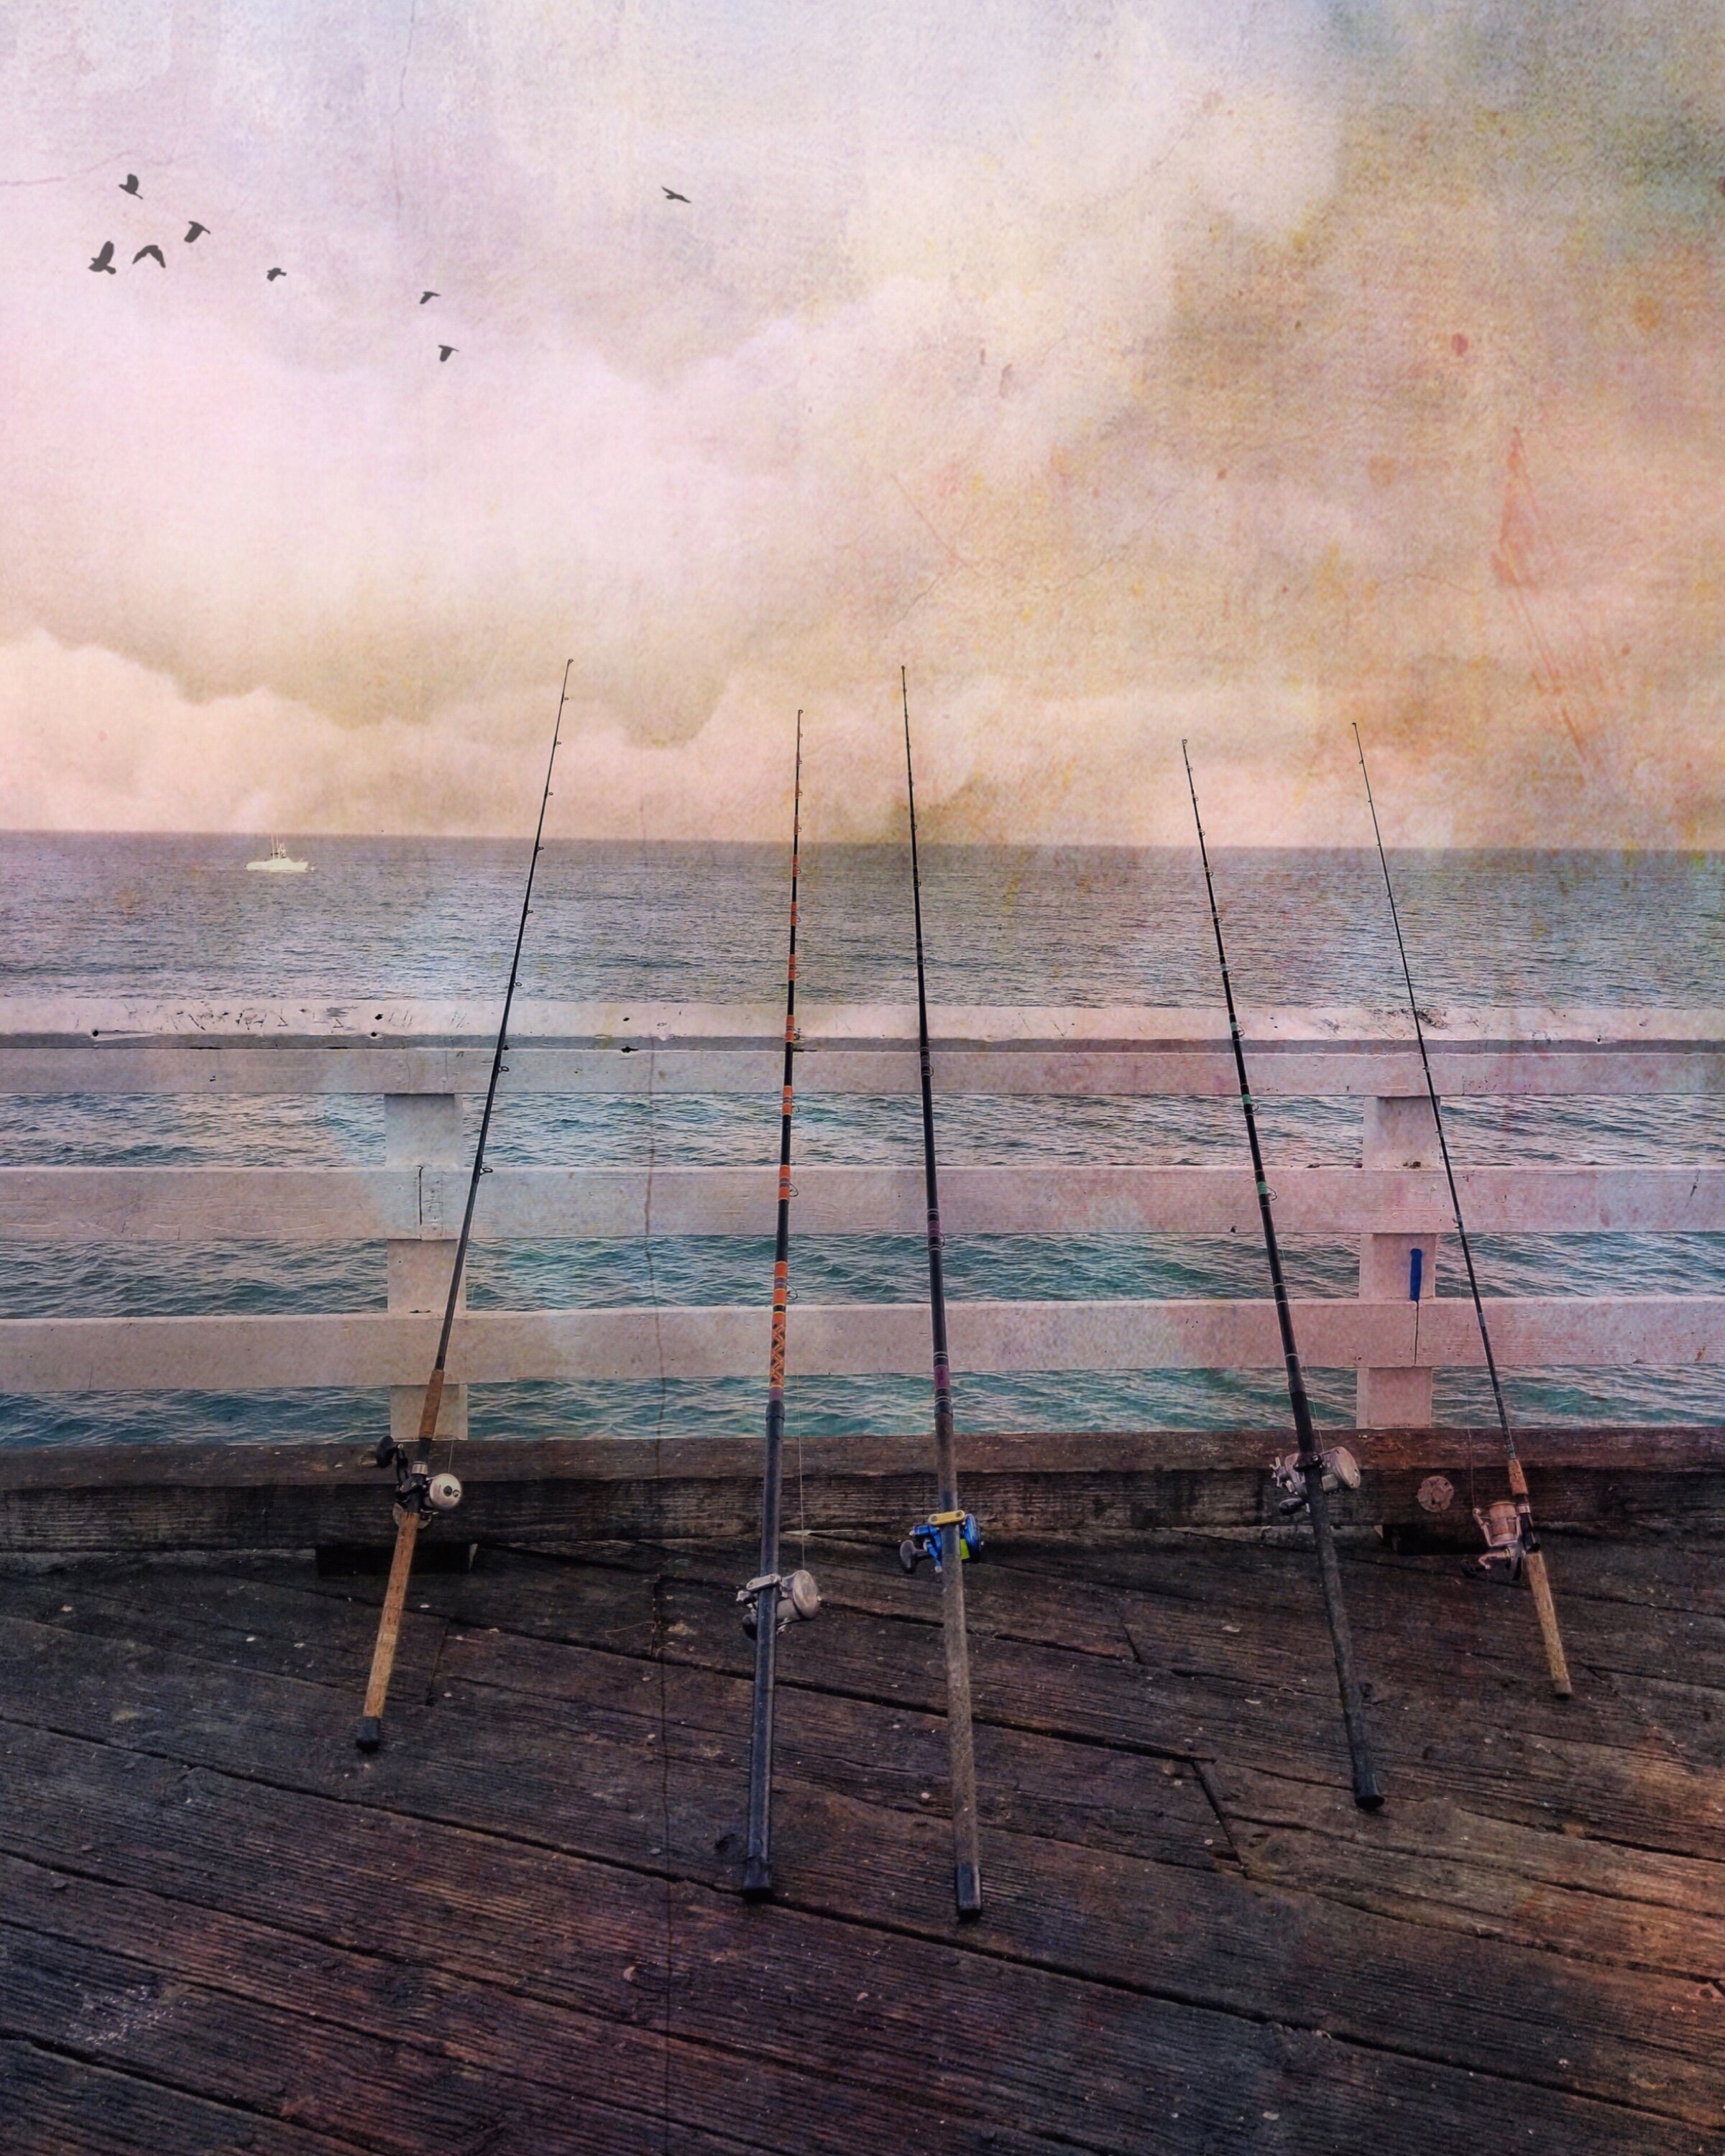 Fishing with multiple rods